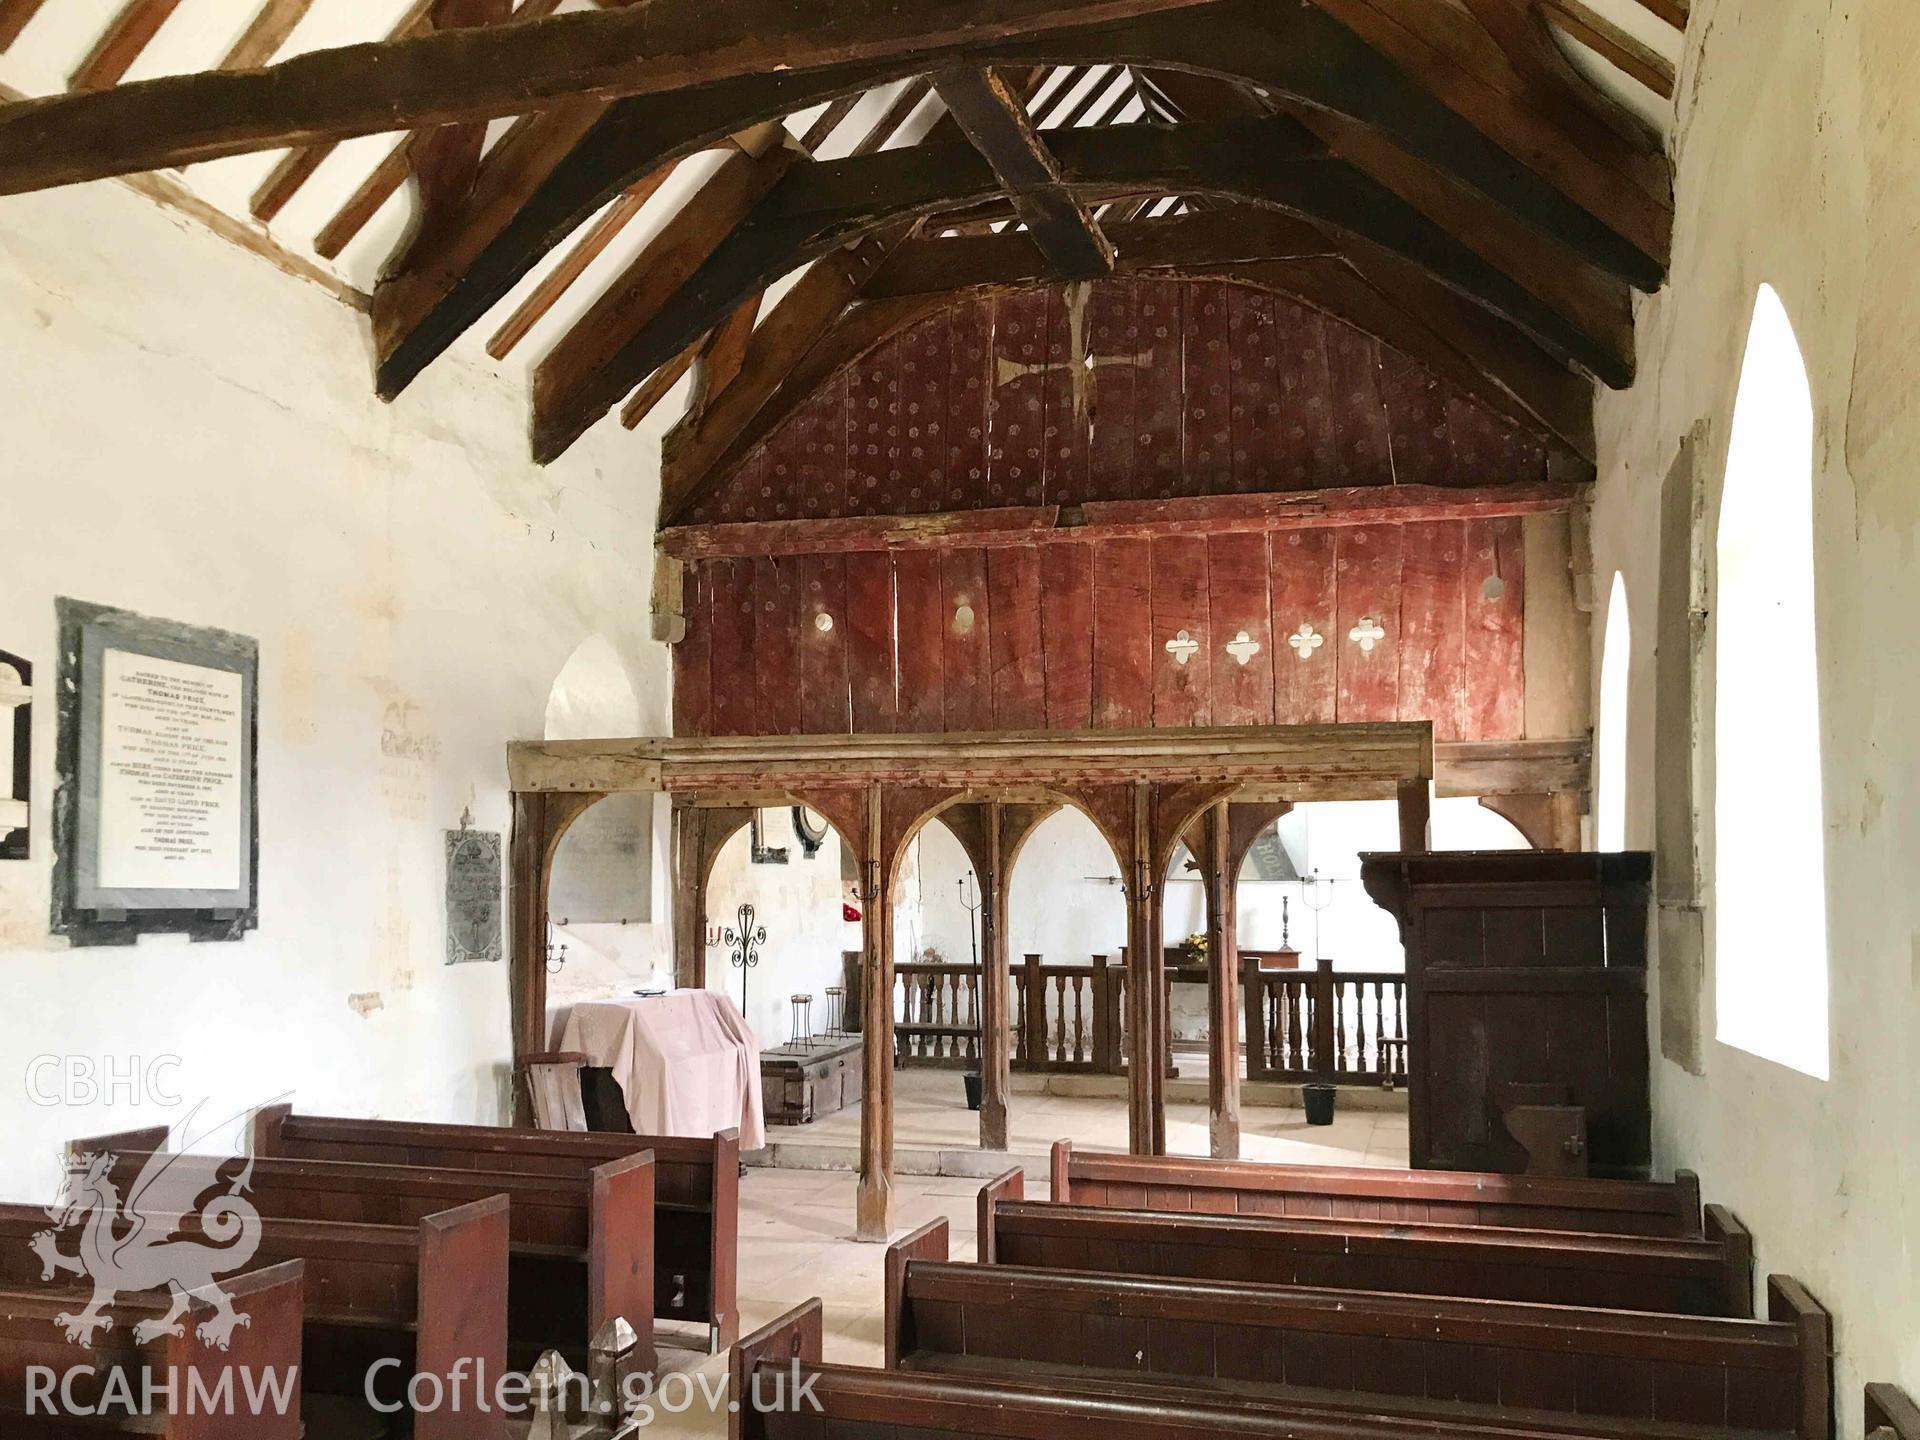 Digital photograph showing rood screen at St Ellyw's Church, Llanelieu, produced by Paul Davis in 2020